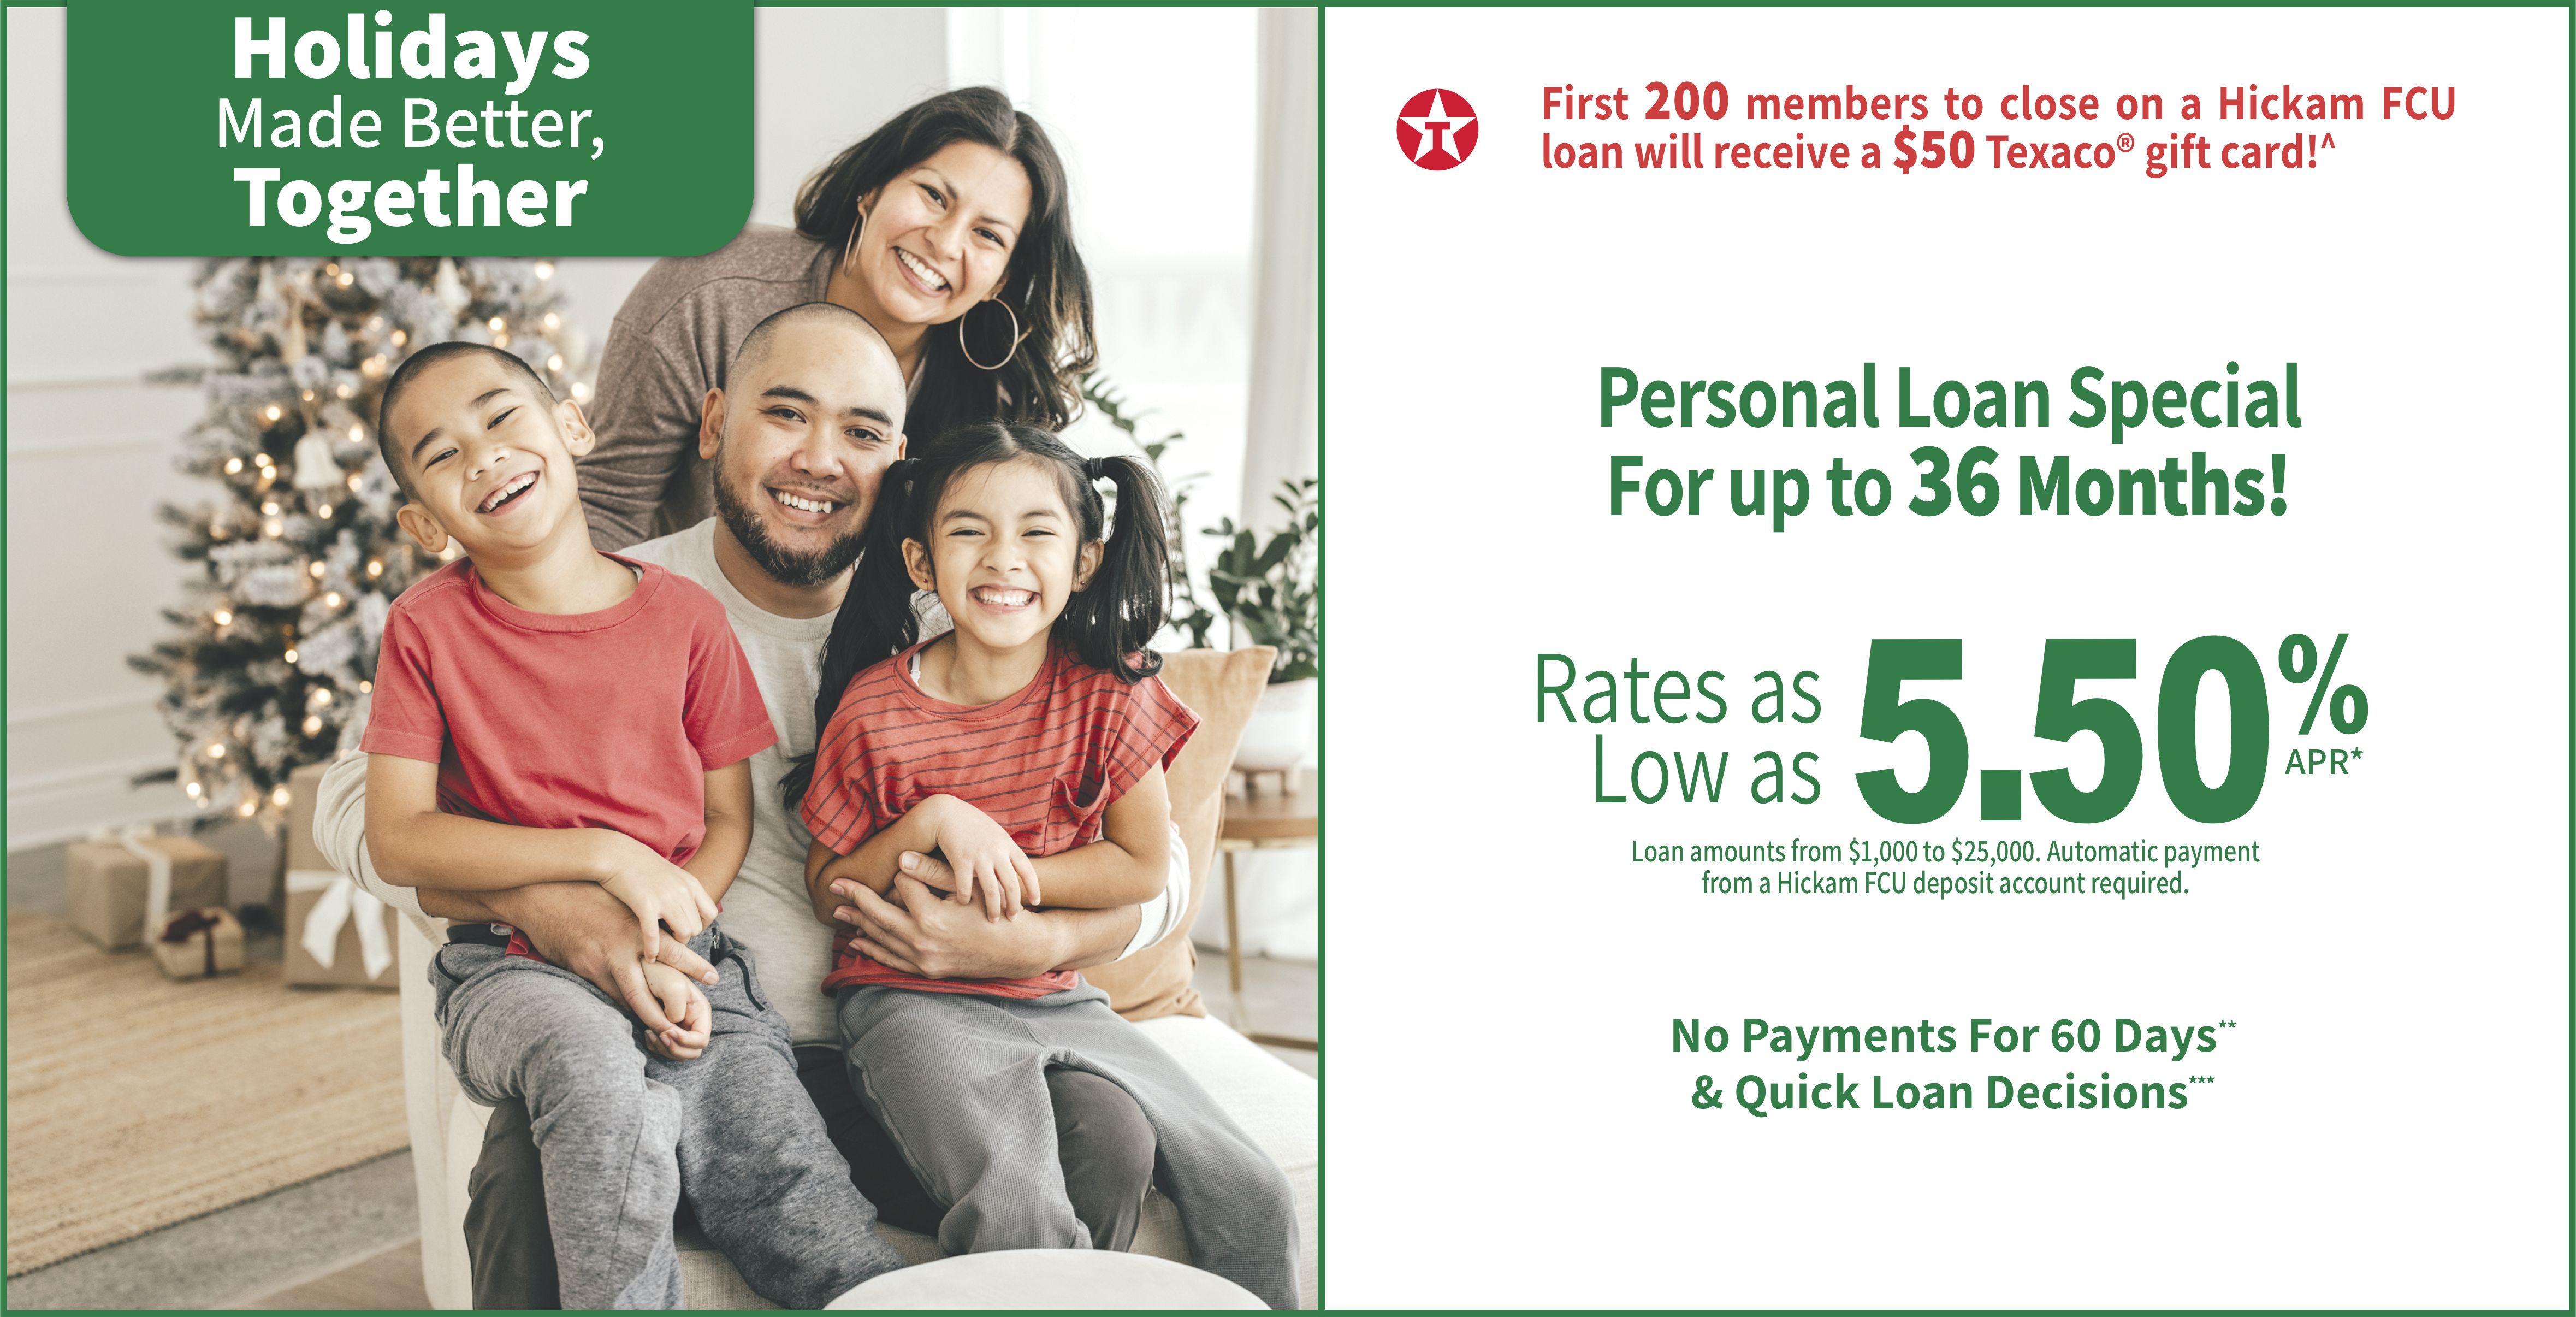 Holidays are better together. Personal loan special rates as low as 5.50% apr* for up to a 36 month term. Loan amounts from $1,000 to $25,000. Automatic payment from a hickam fcu deposit account required. no payments for 60 days & quick loan decisions